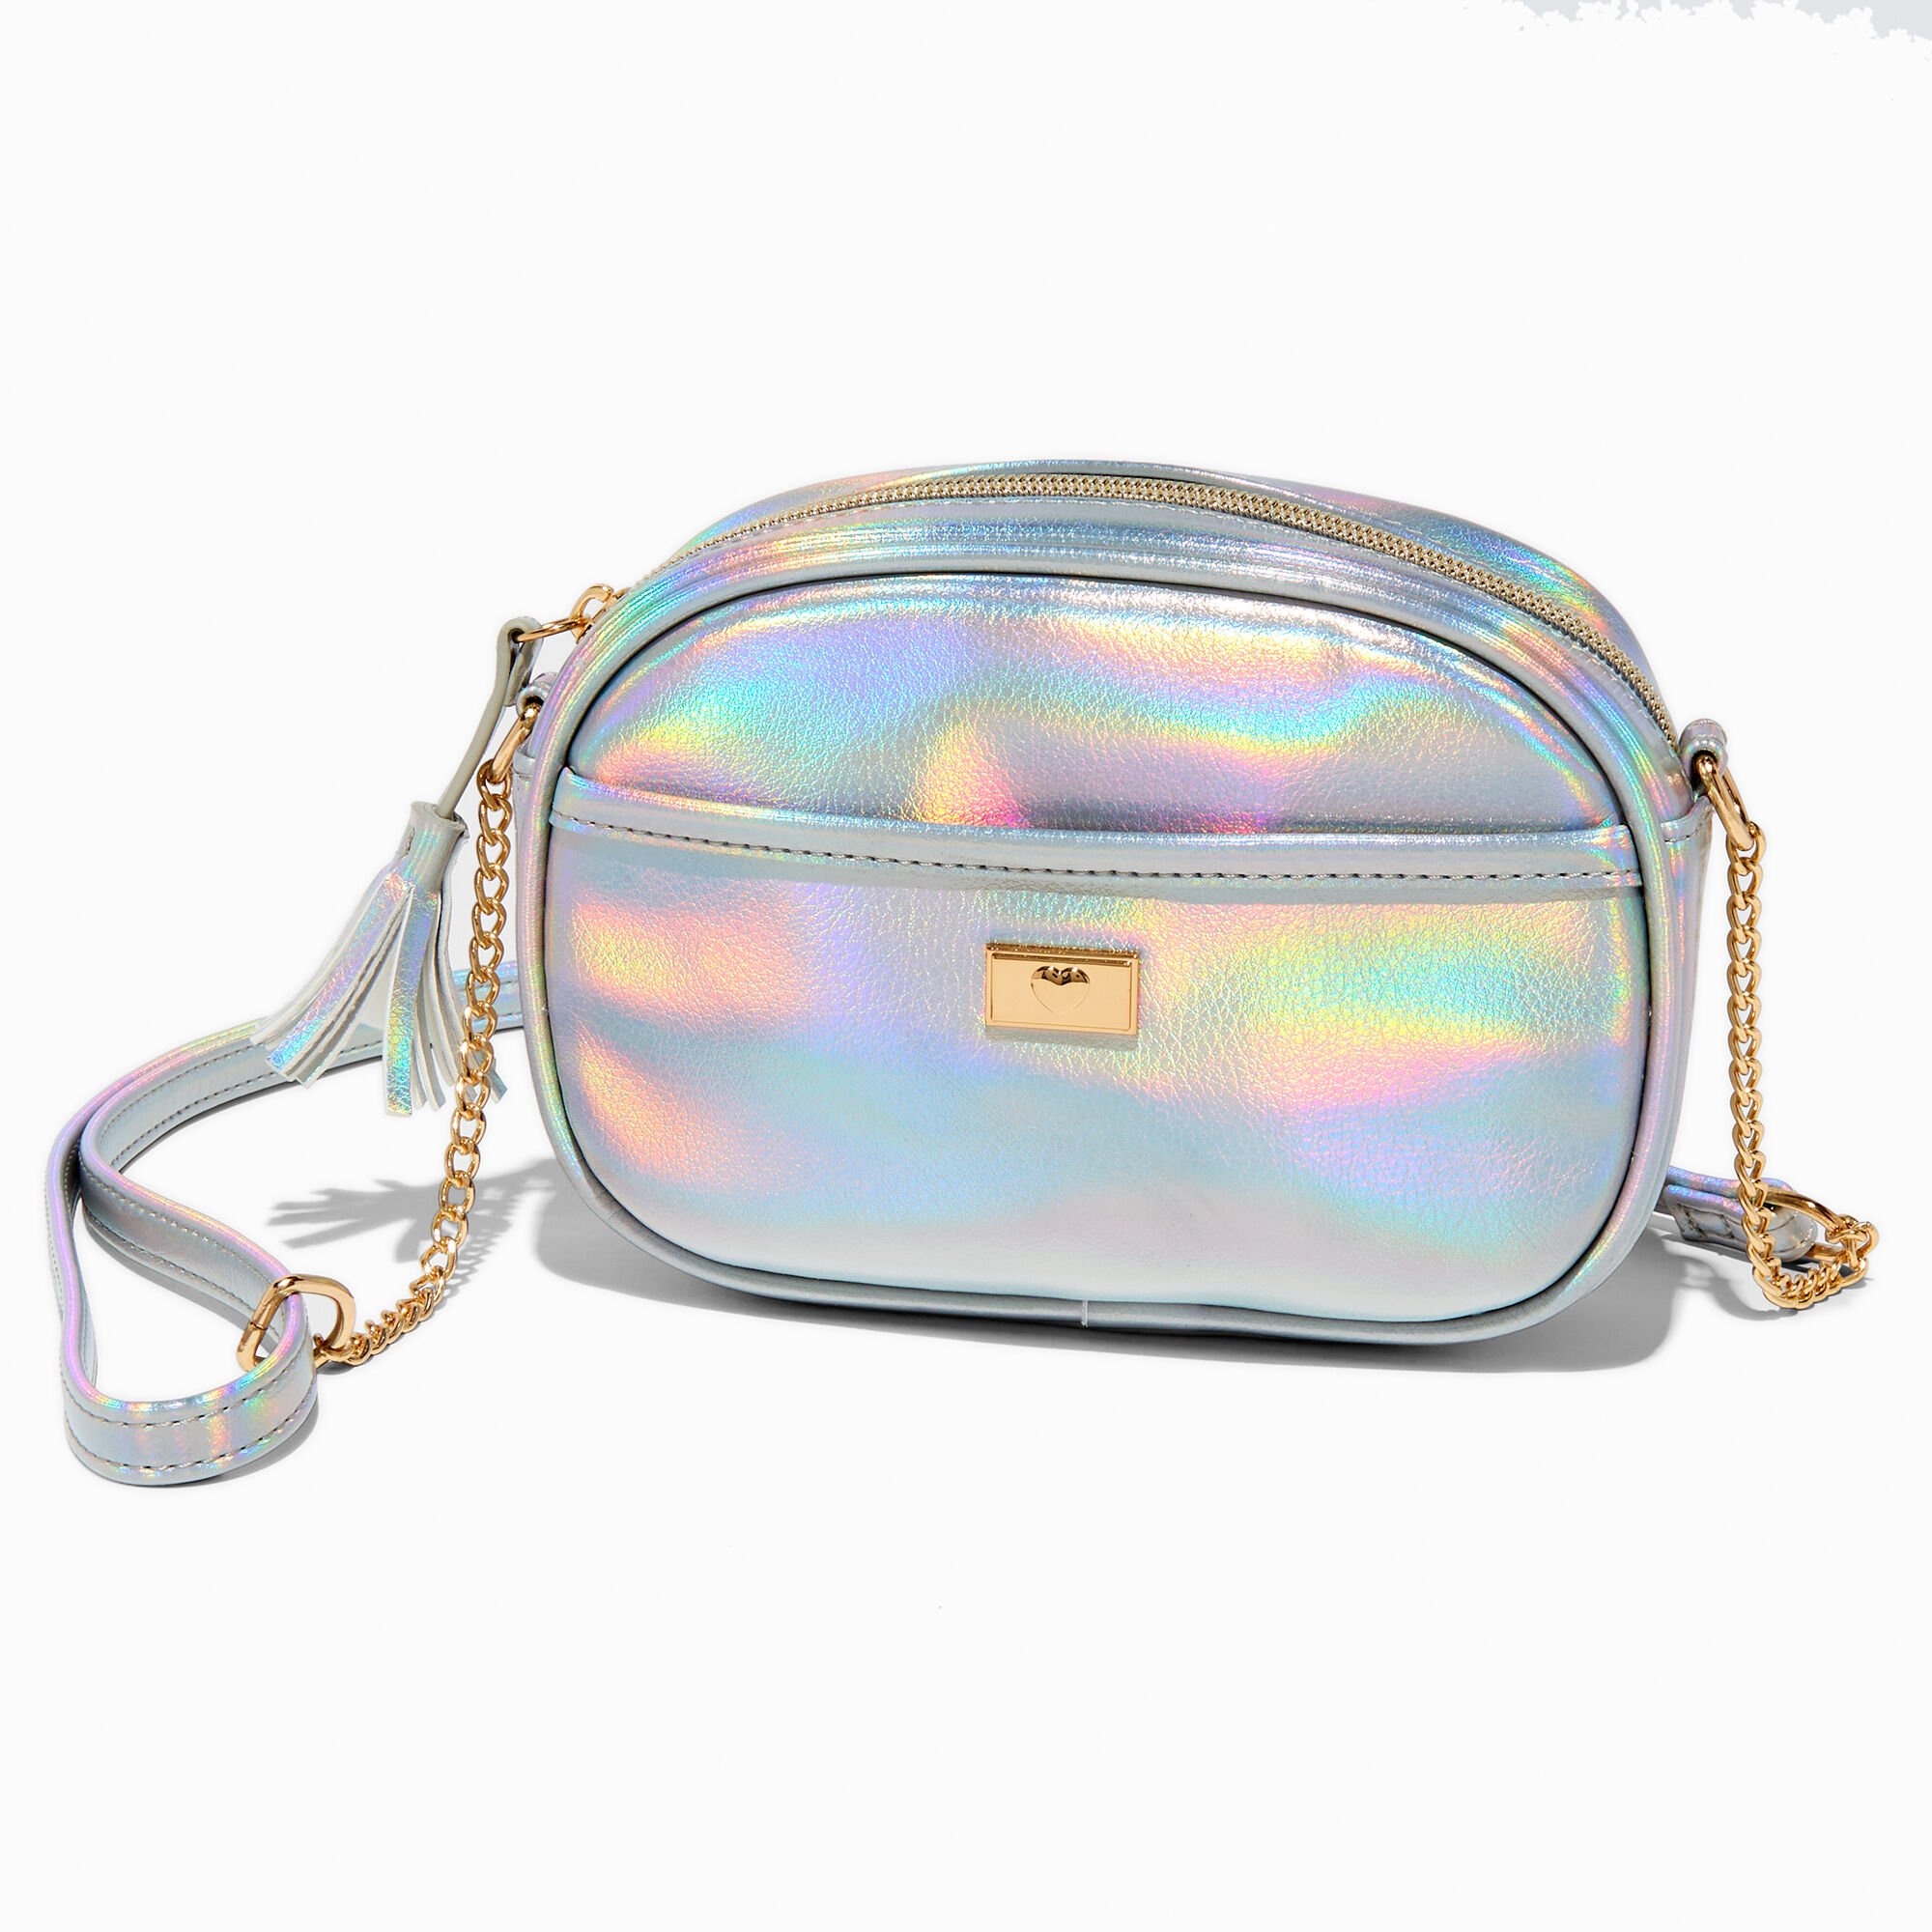 View Claires Ab Oval Crossbody Bag Silver information